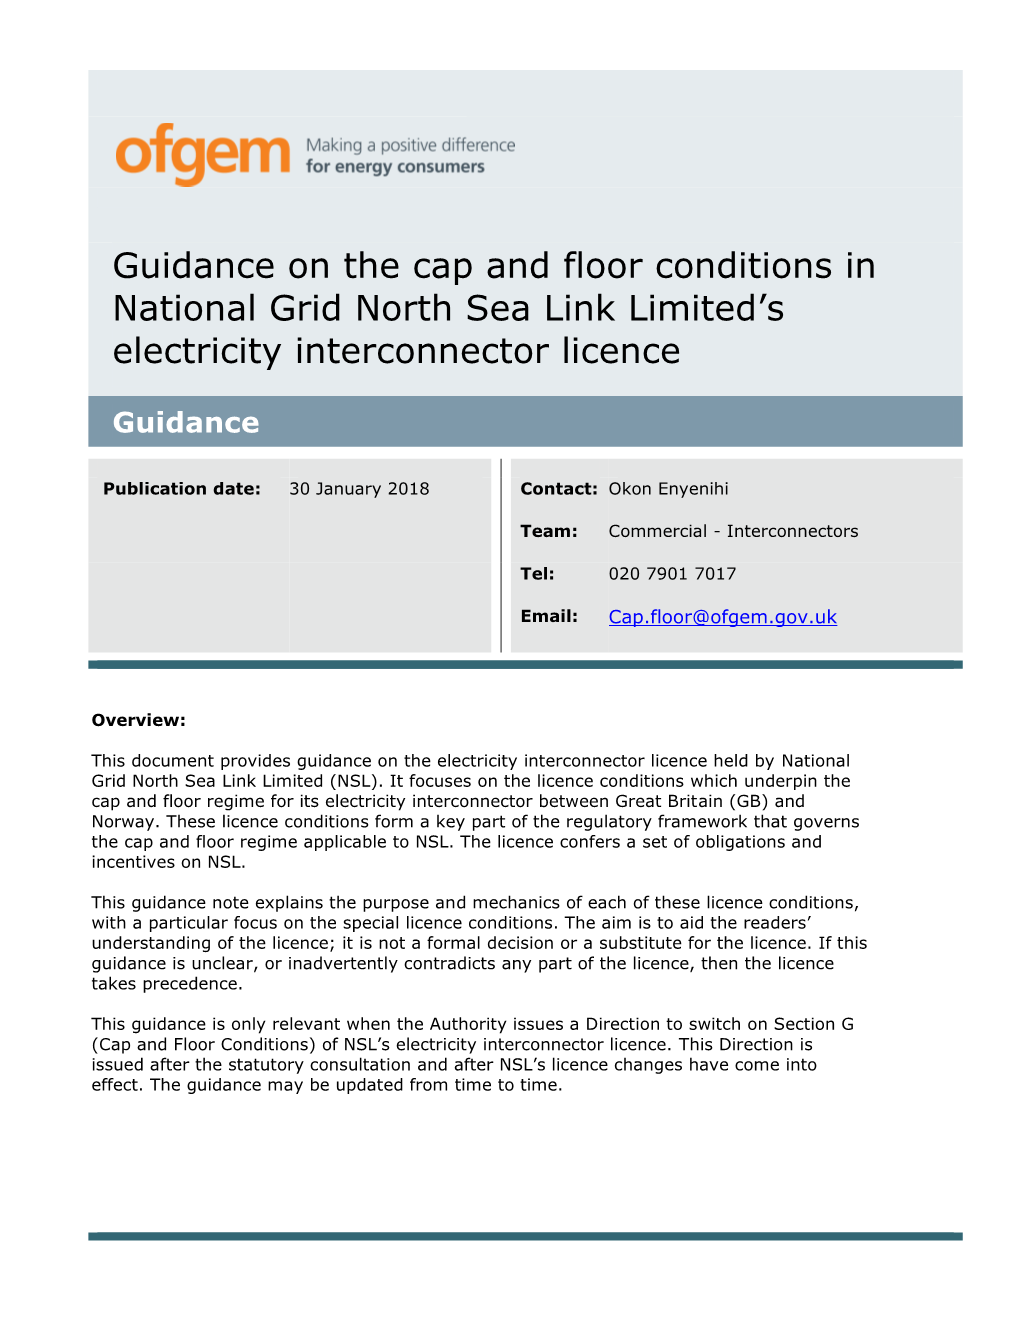 Guidance on the Cap and Floor Conditions in National Grid North Sea Link Limited’S Electricity Interconnector Licence